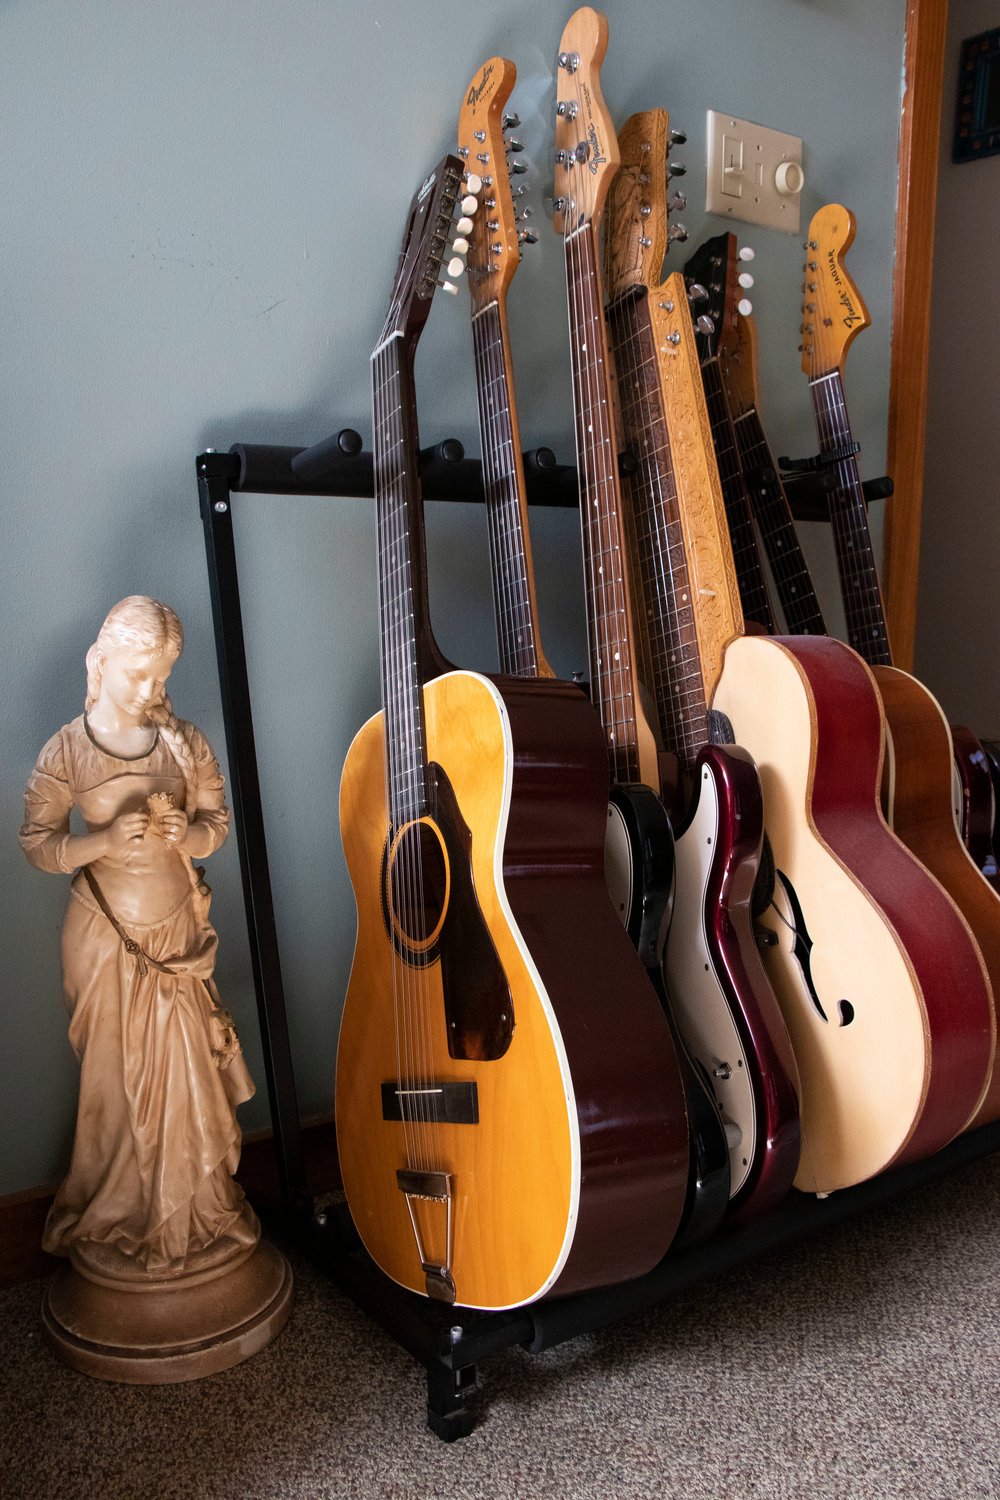 A sampling of some of the guitars Crosby has collected over the years.